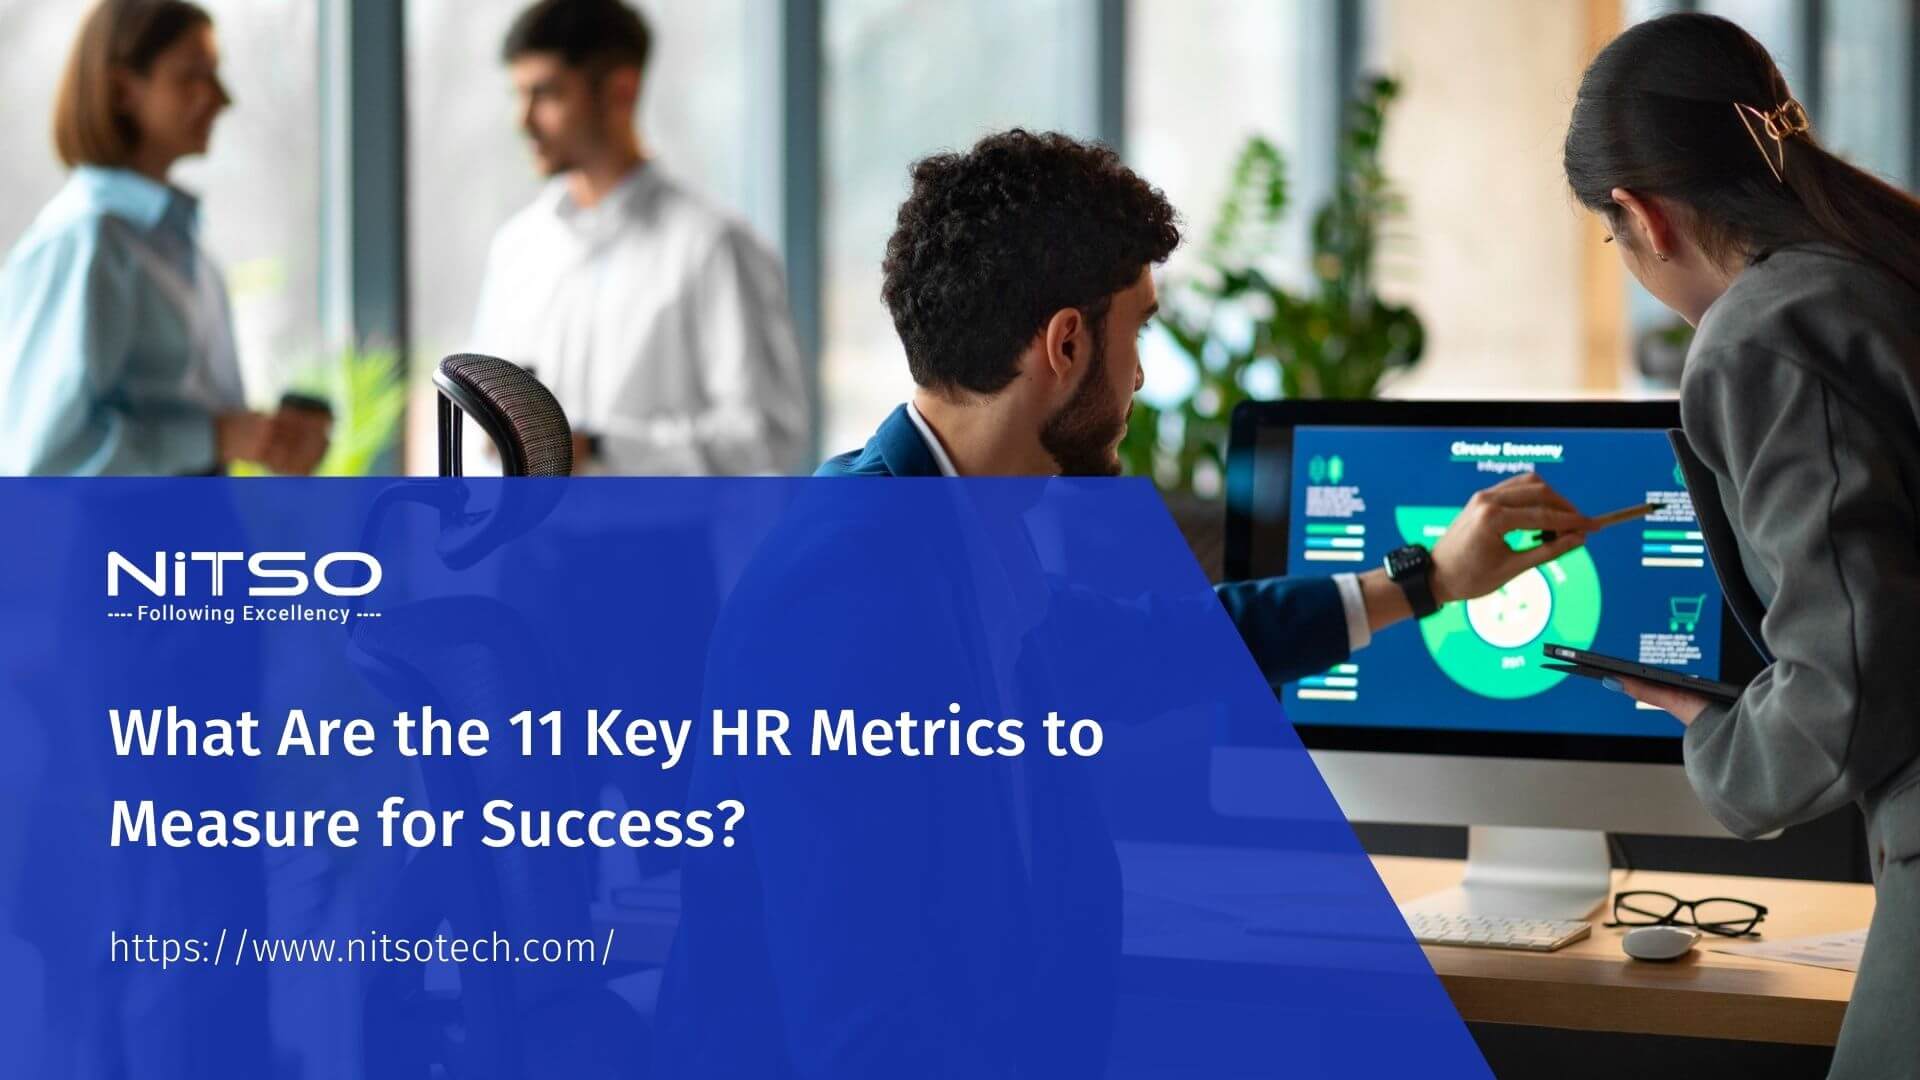 What Are the 11 Key HR Metrics to Measure for Success?